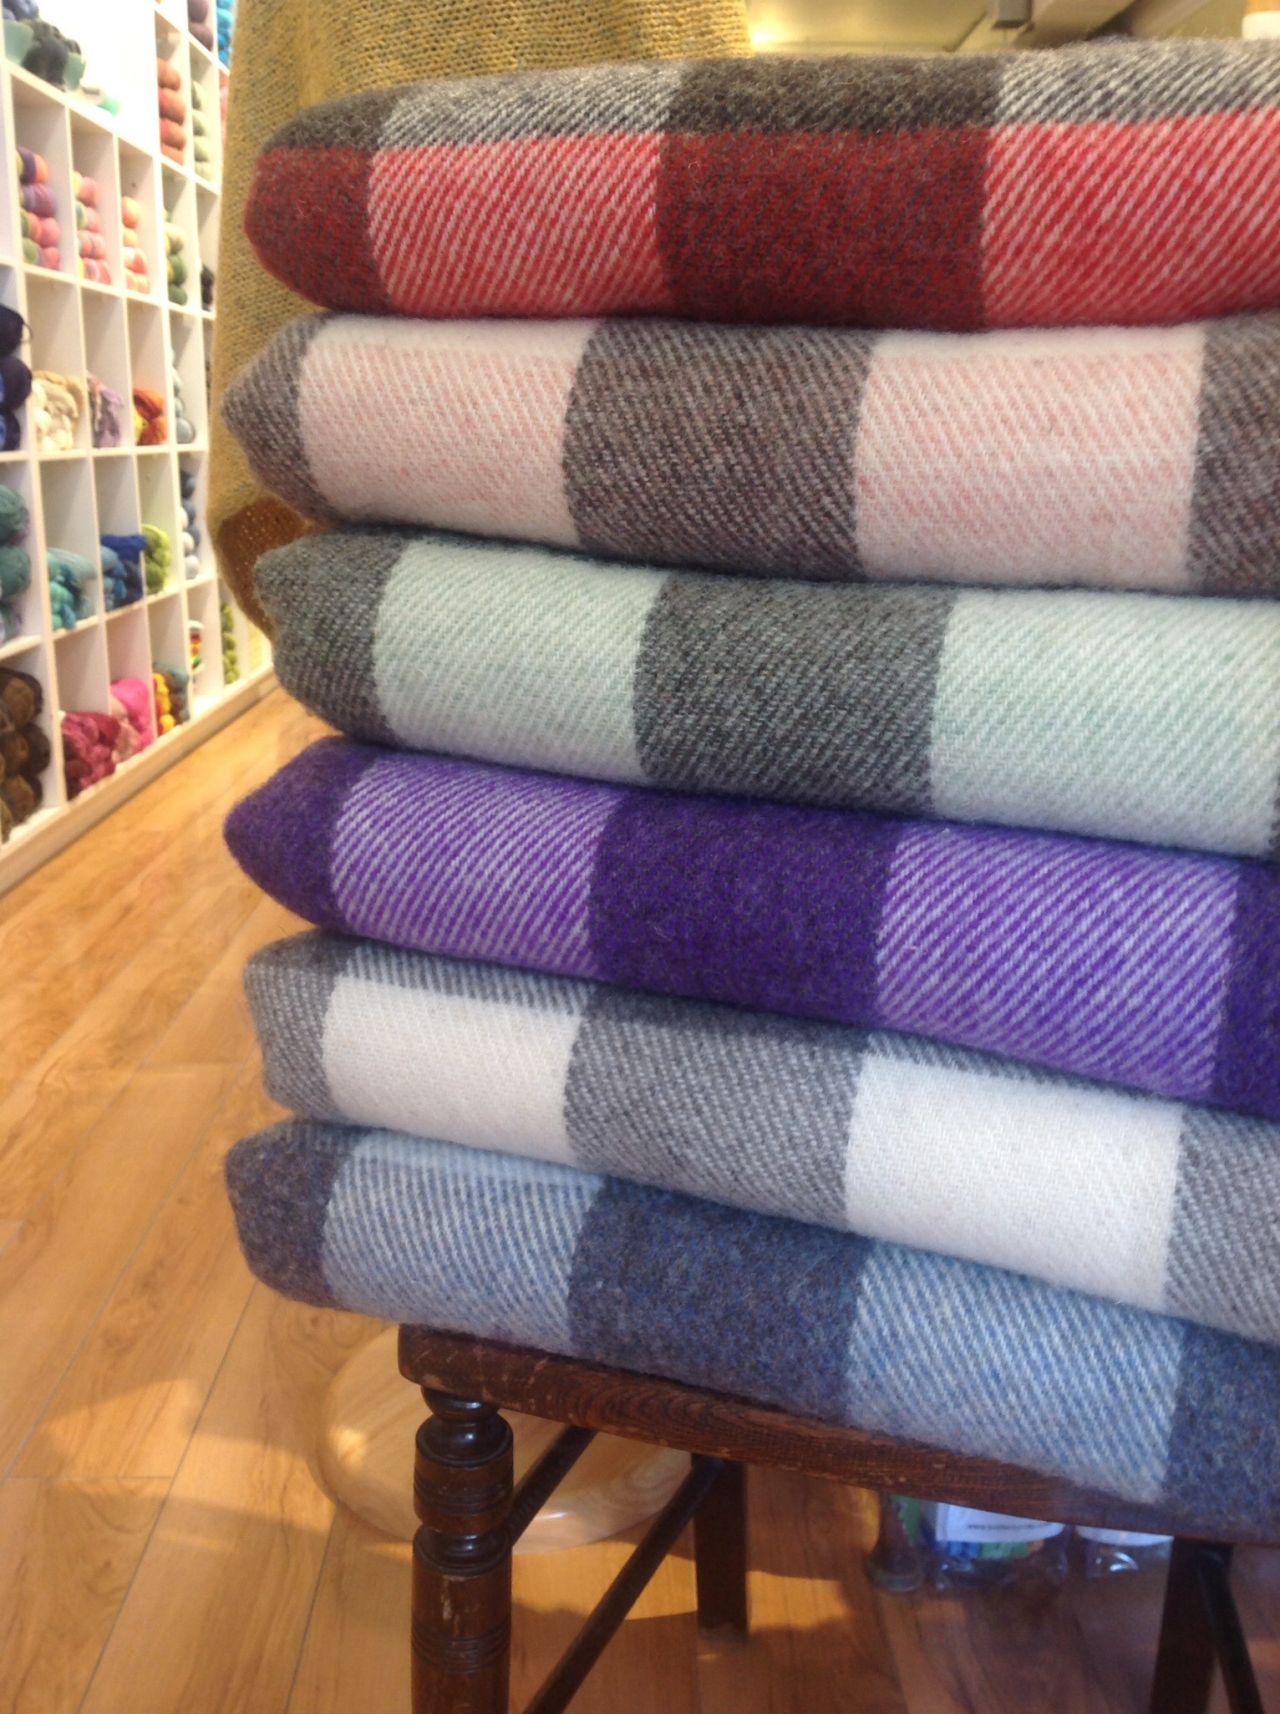 Wool Throws in 6 beautiful colour combinations